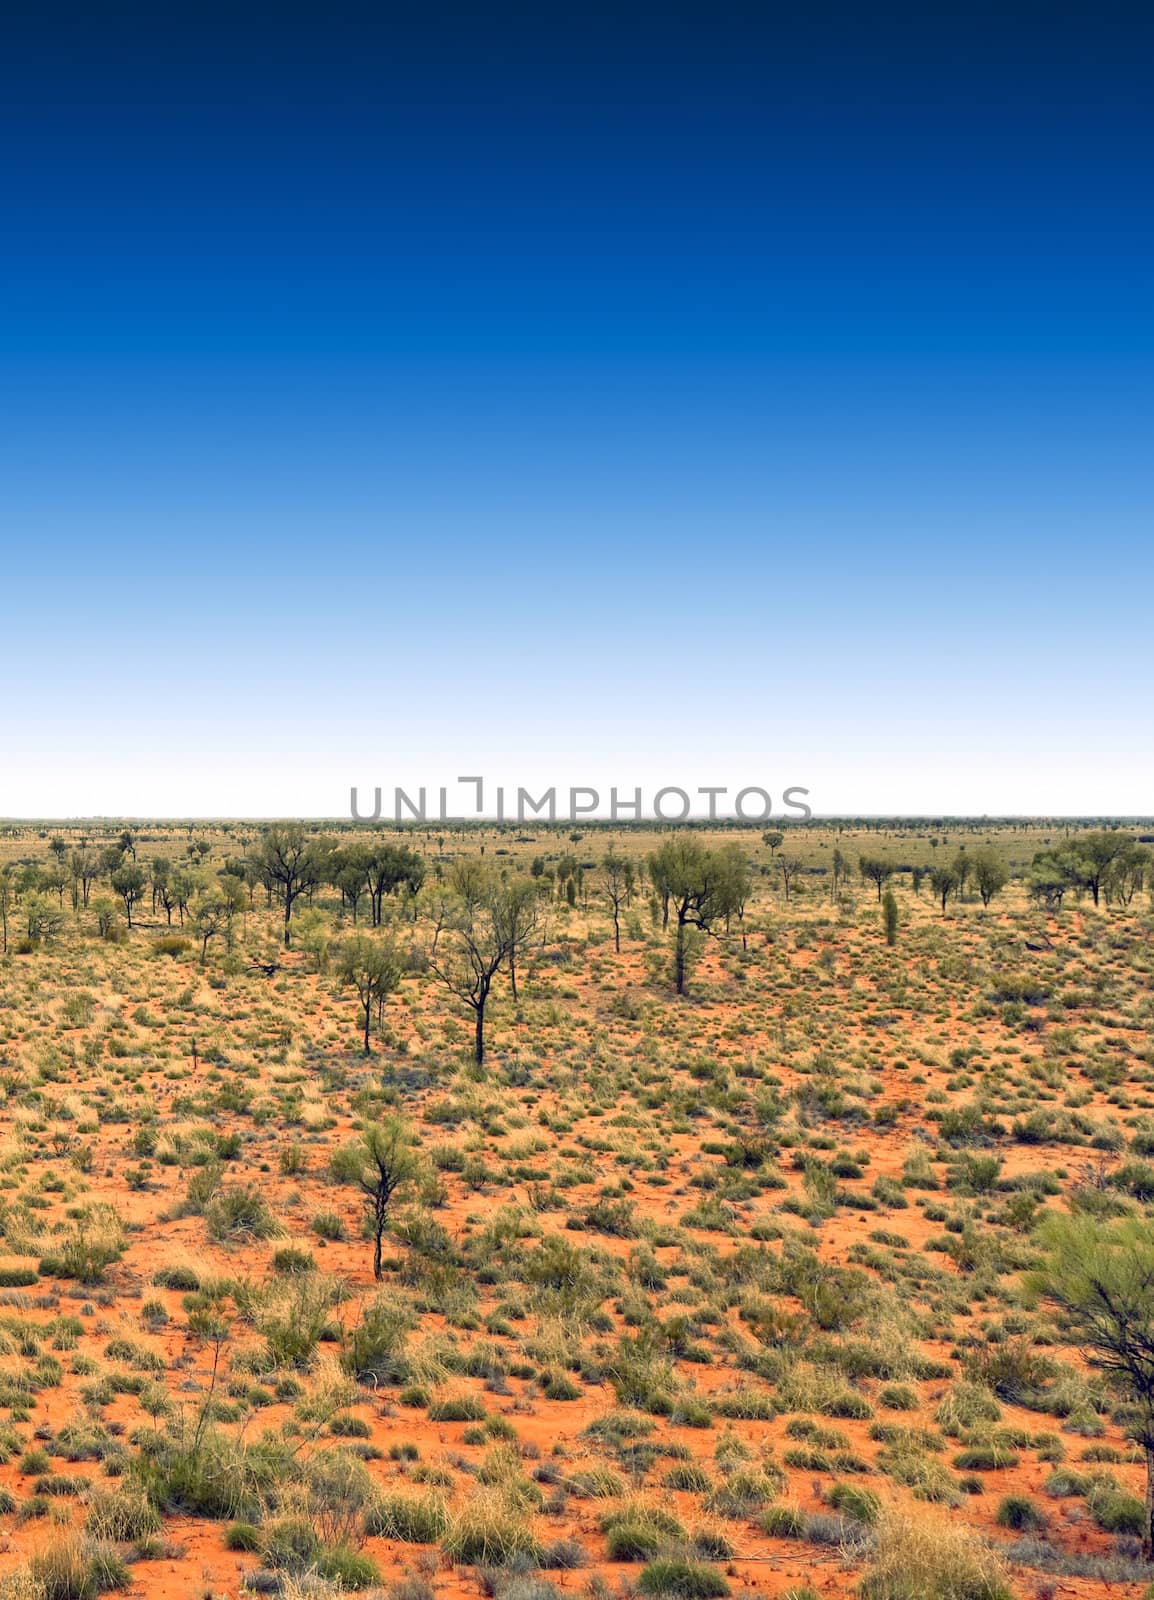 A photography of the australia outback with a deep blue sky